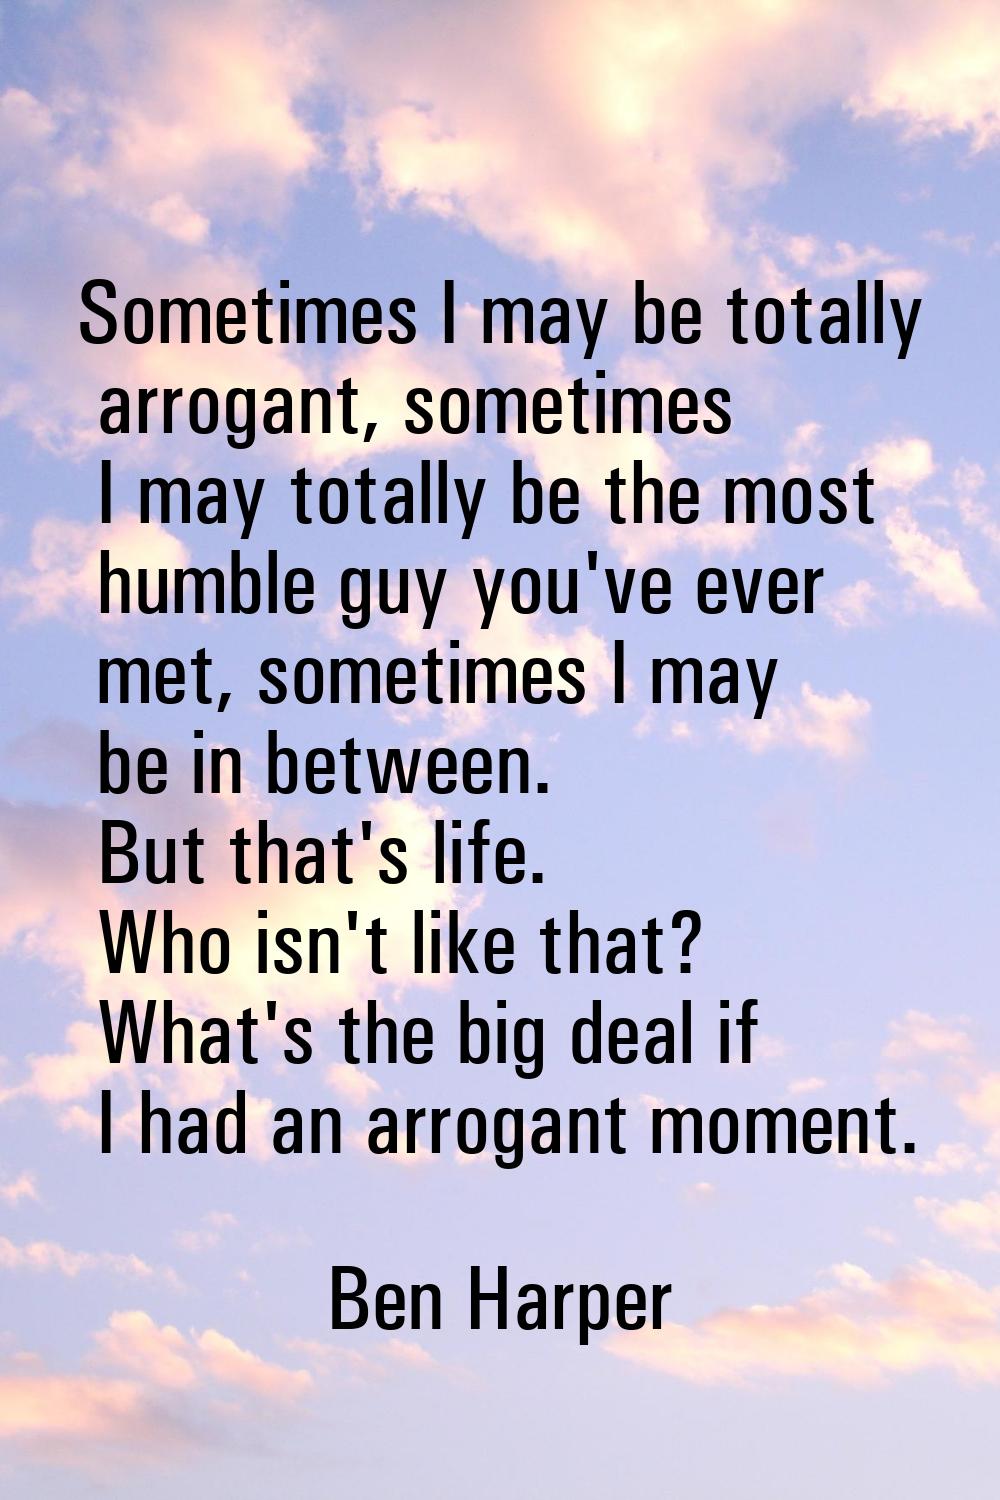 Sometimes I may be totally arrogant, sometimes I may totally be the most humble guy you've ever met